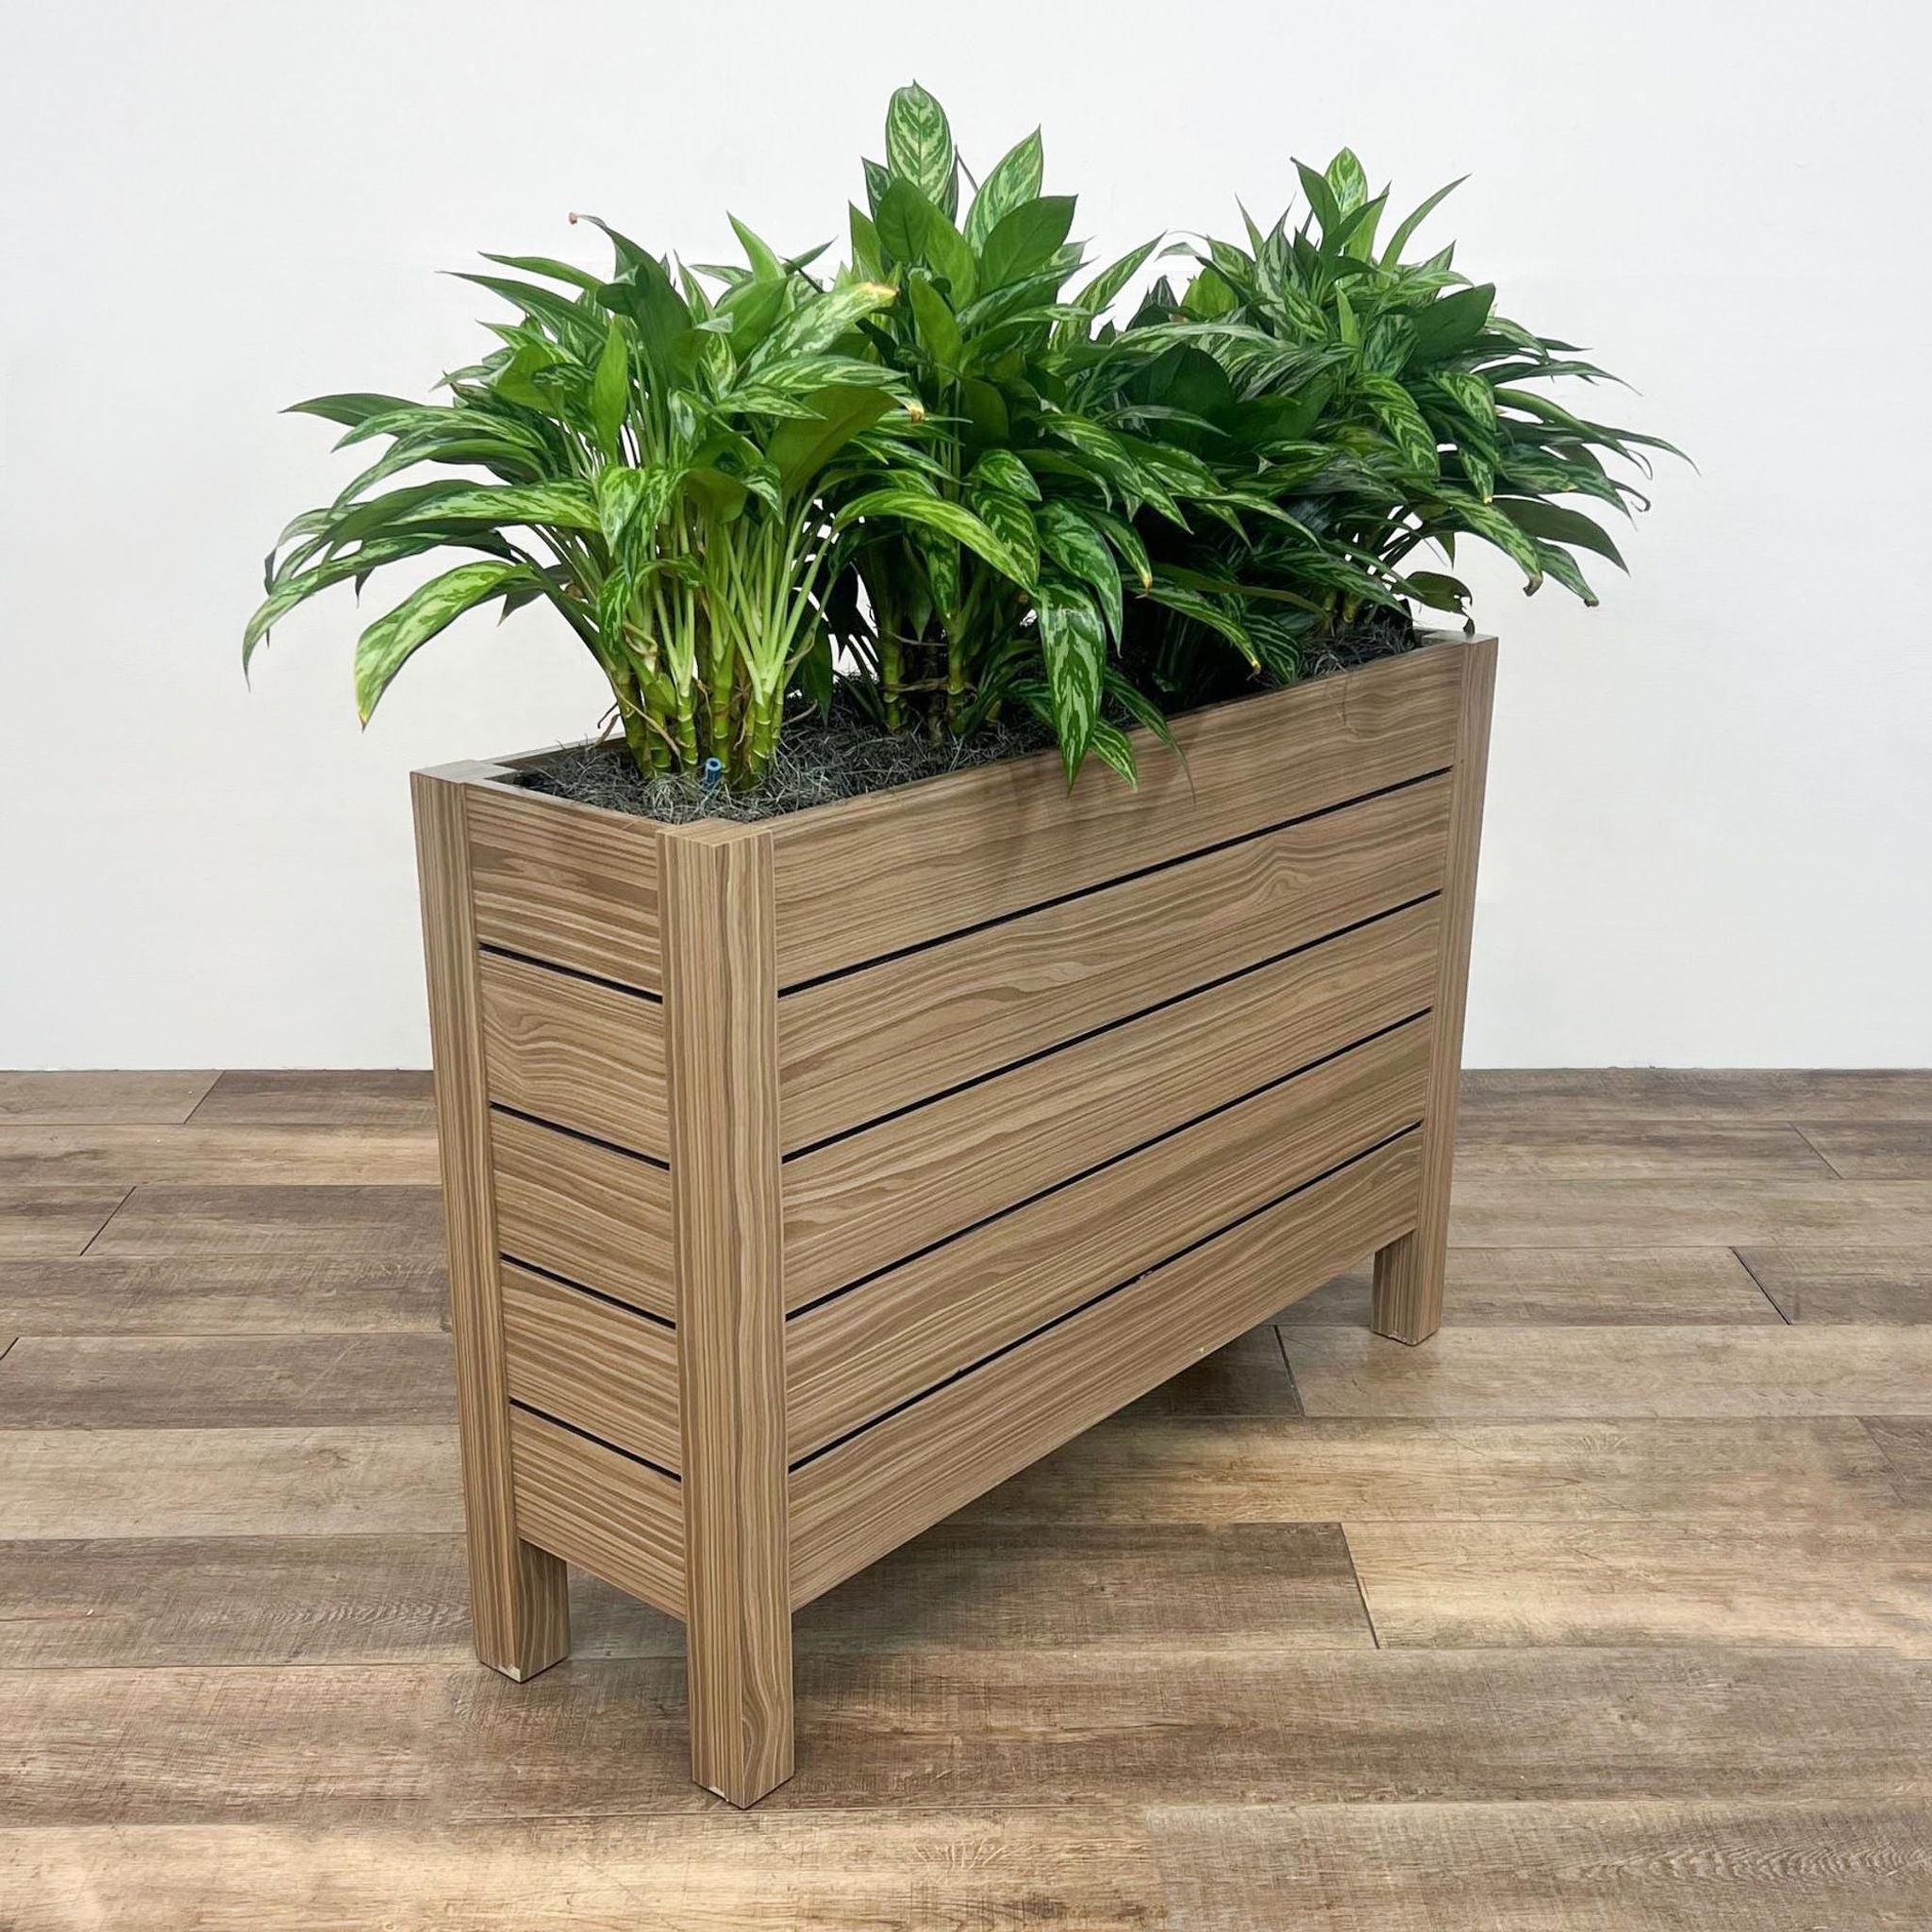 Vertical-oriented OFS Intermix wooden planter filled with lush greenery, on a laminate flooring.